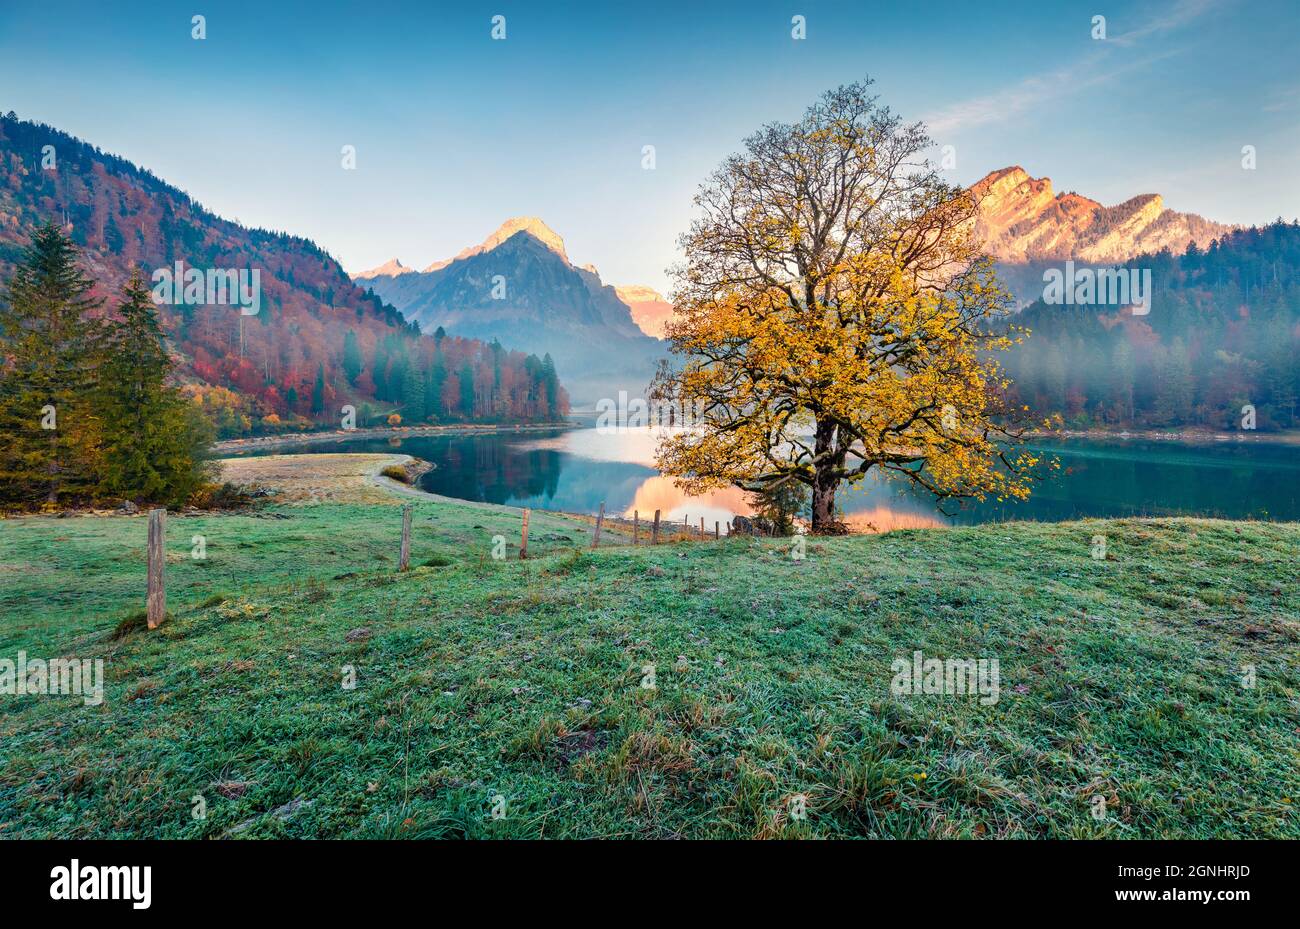 Lonely golden tree on the middle of frosty valley. Picturesque autumn view of Obersee lake, Nafels village location. Amazing morning scene of Swiss Al Stock Photo